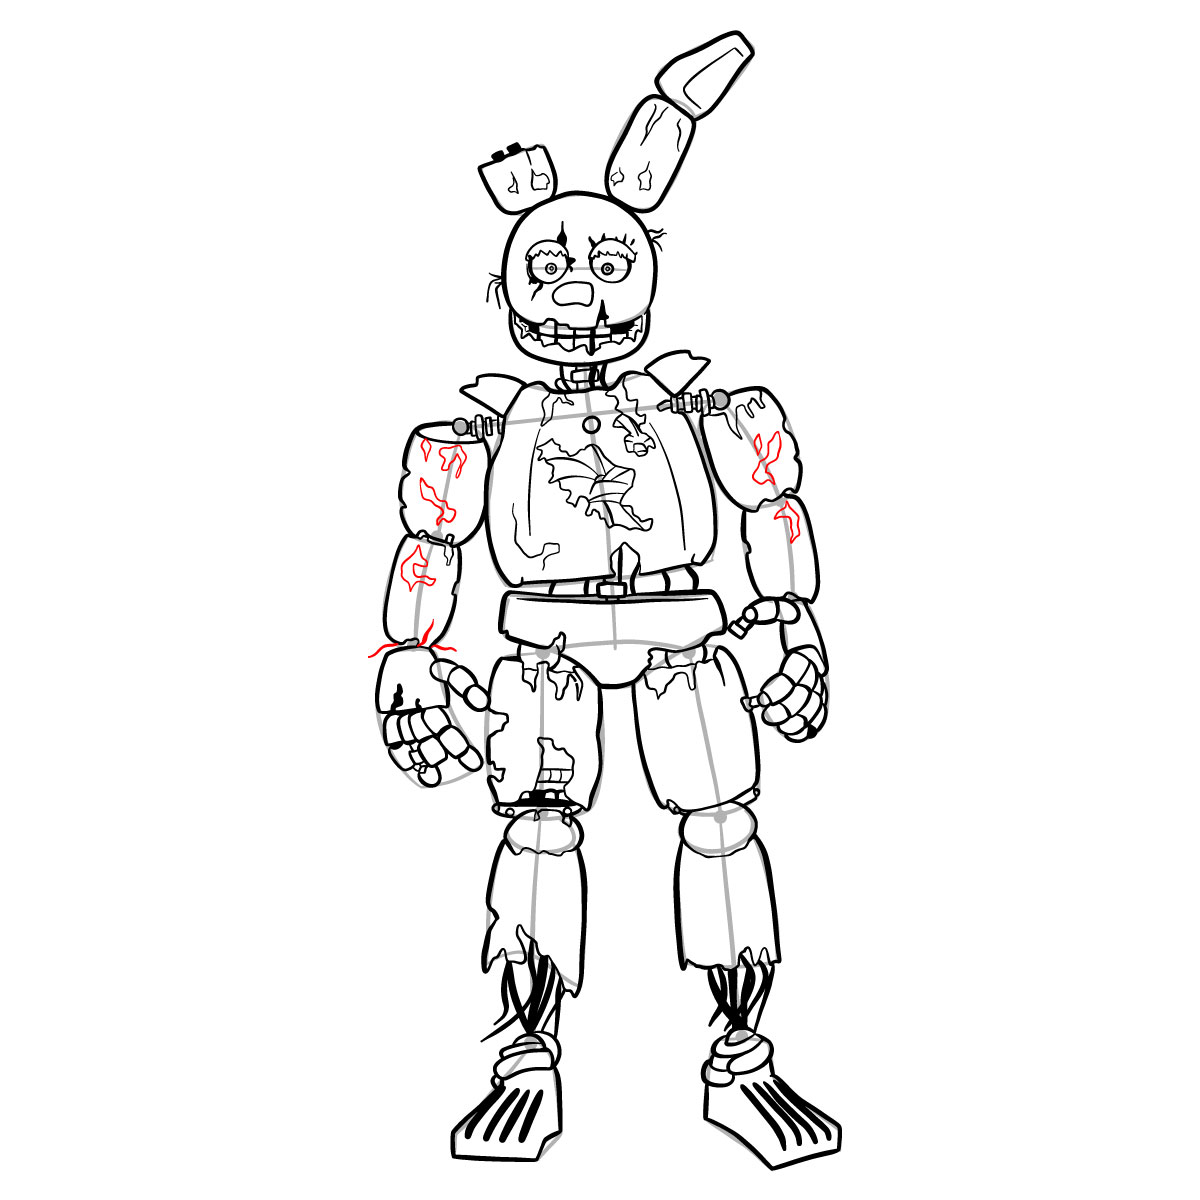 How to draw Springtrap from FNAF 3 - SketchOk